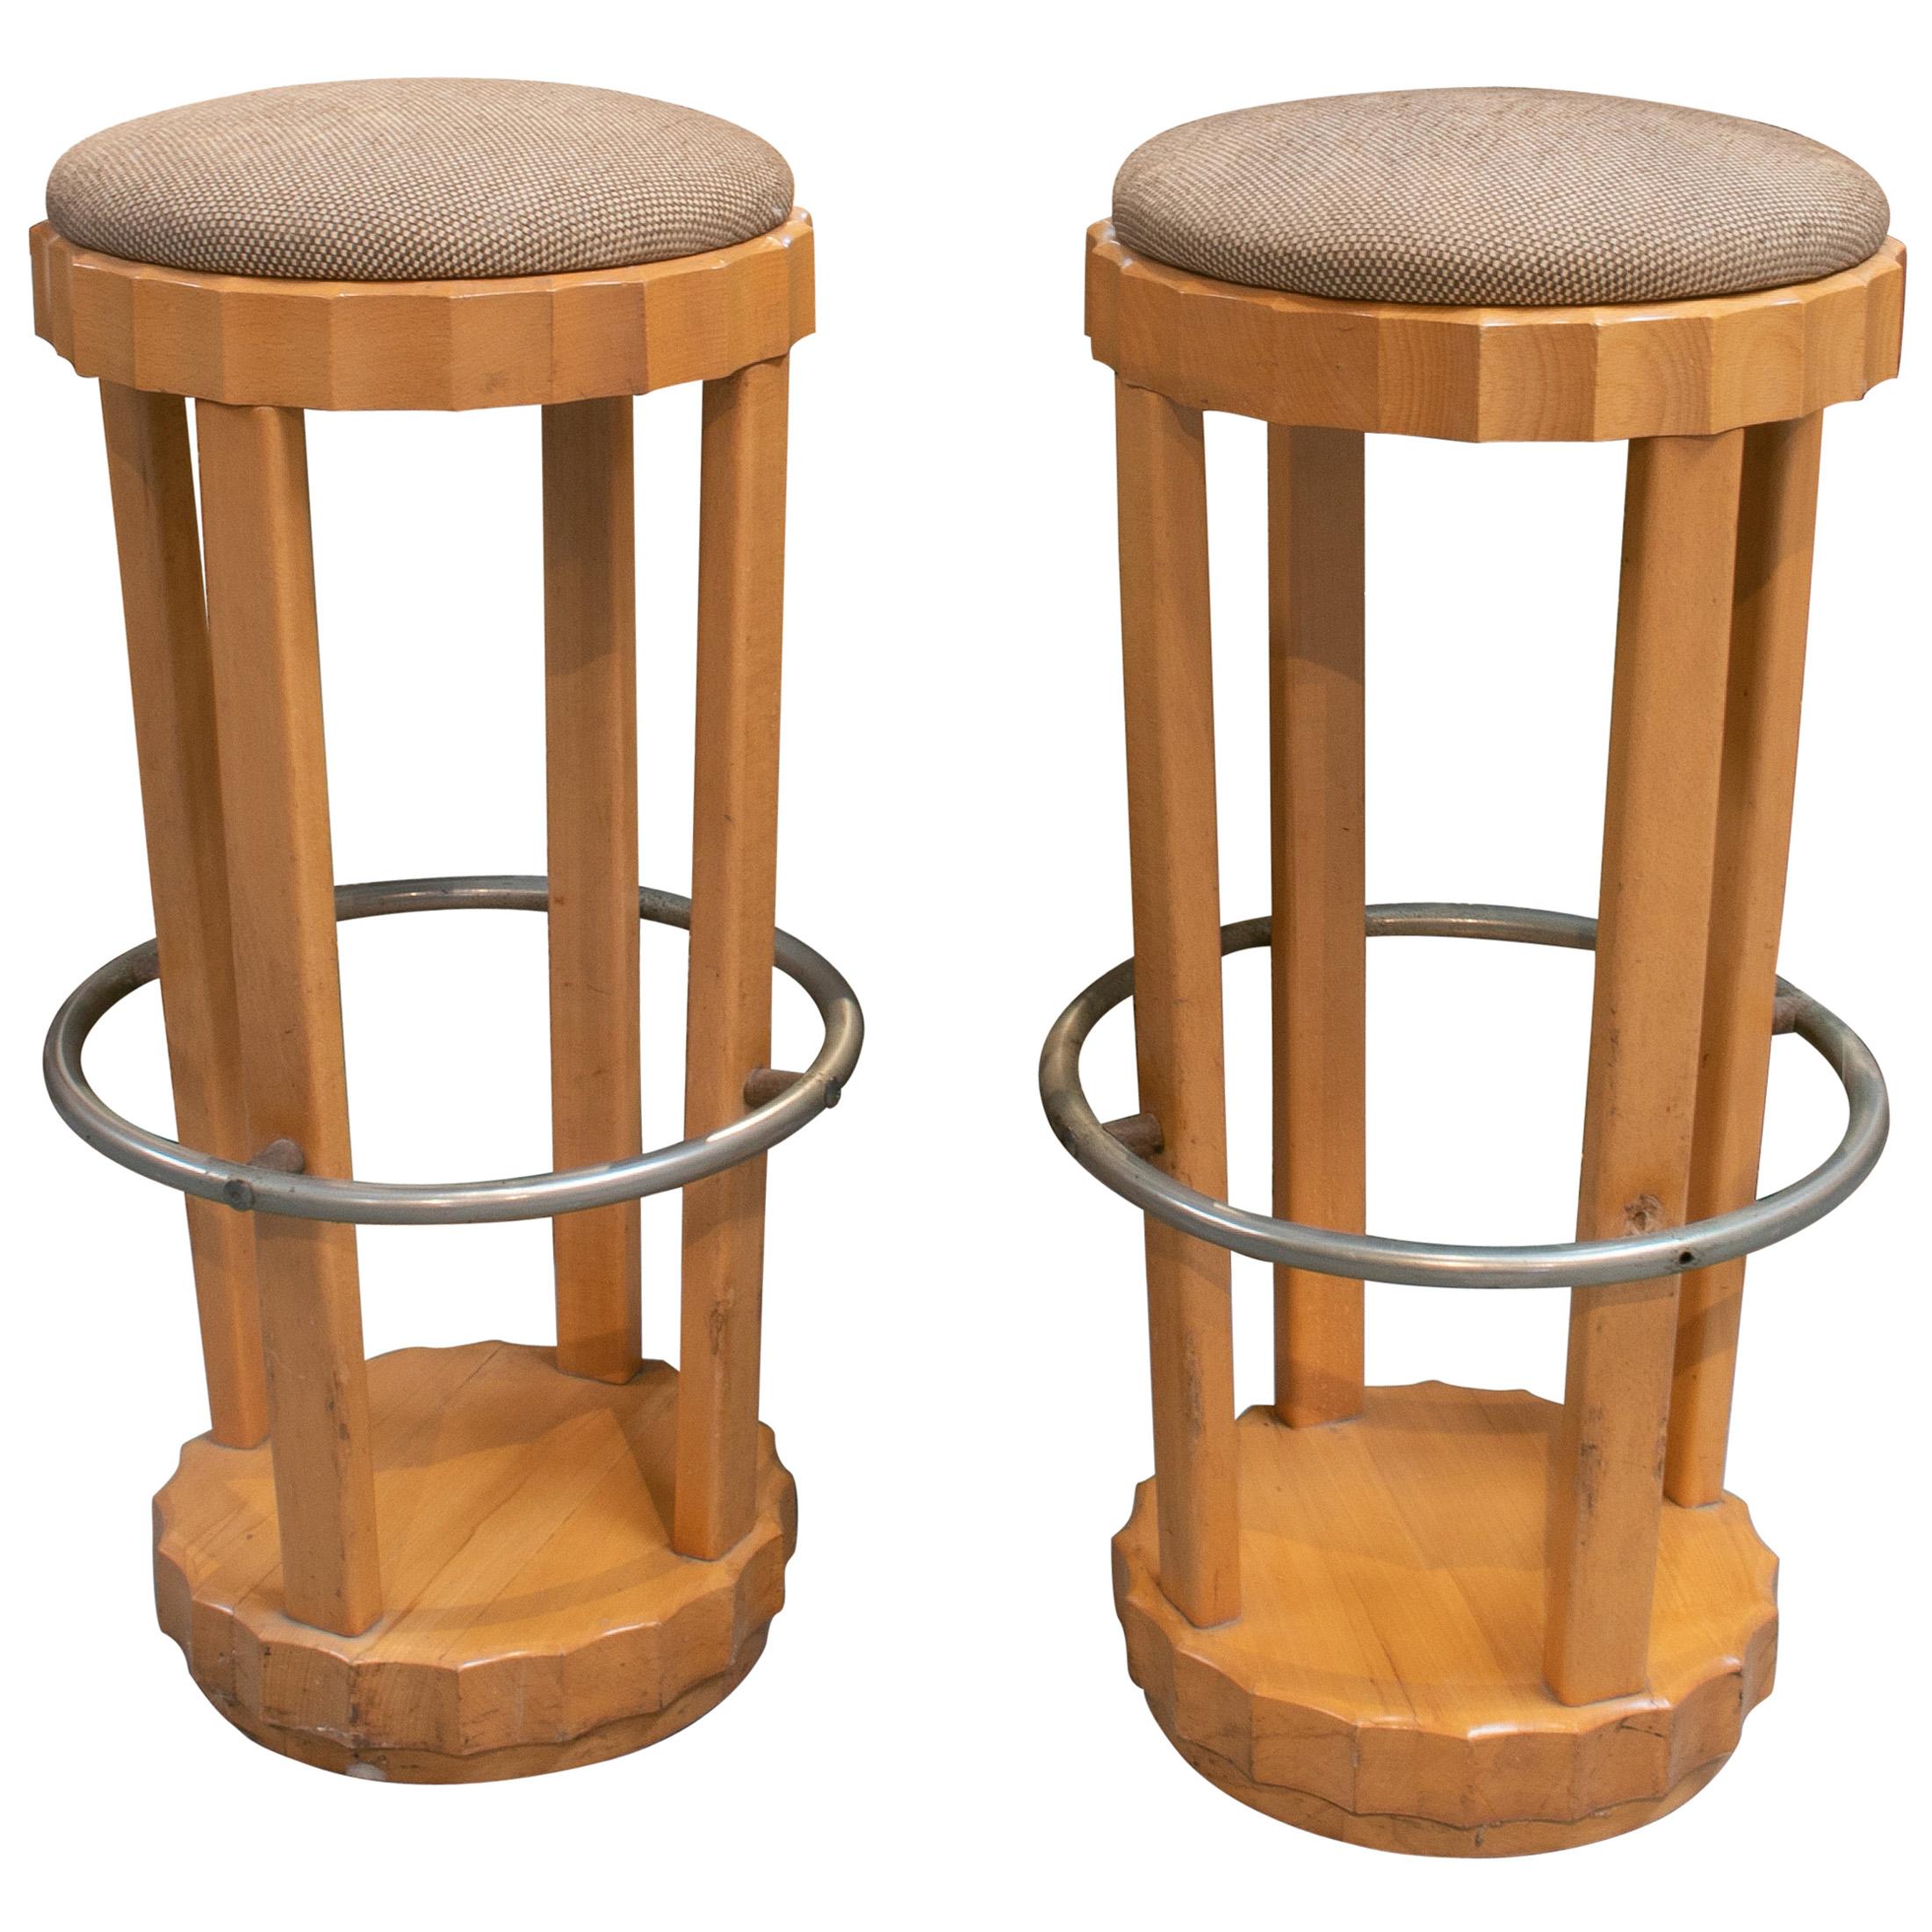 1970s Pair of Spanish Stools with Aluminium Foot Rests For Sale